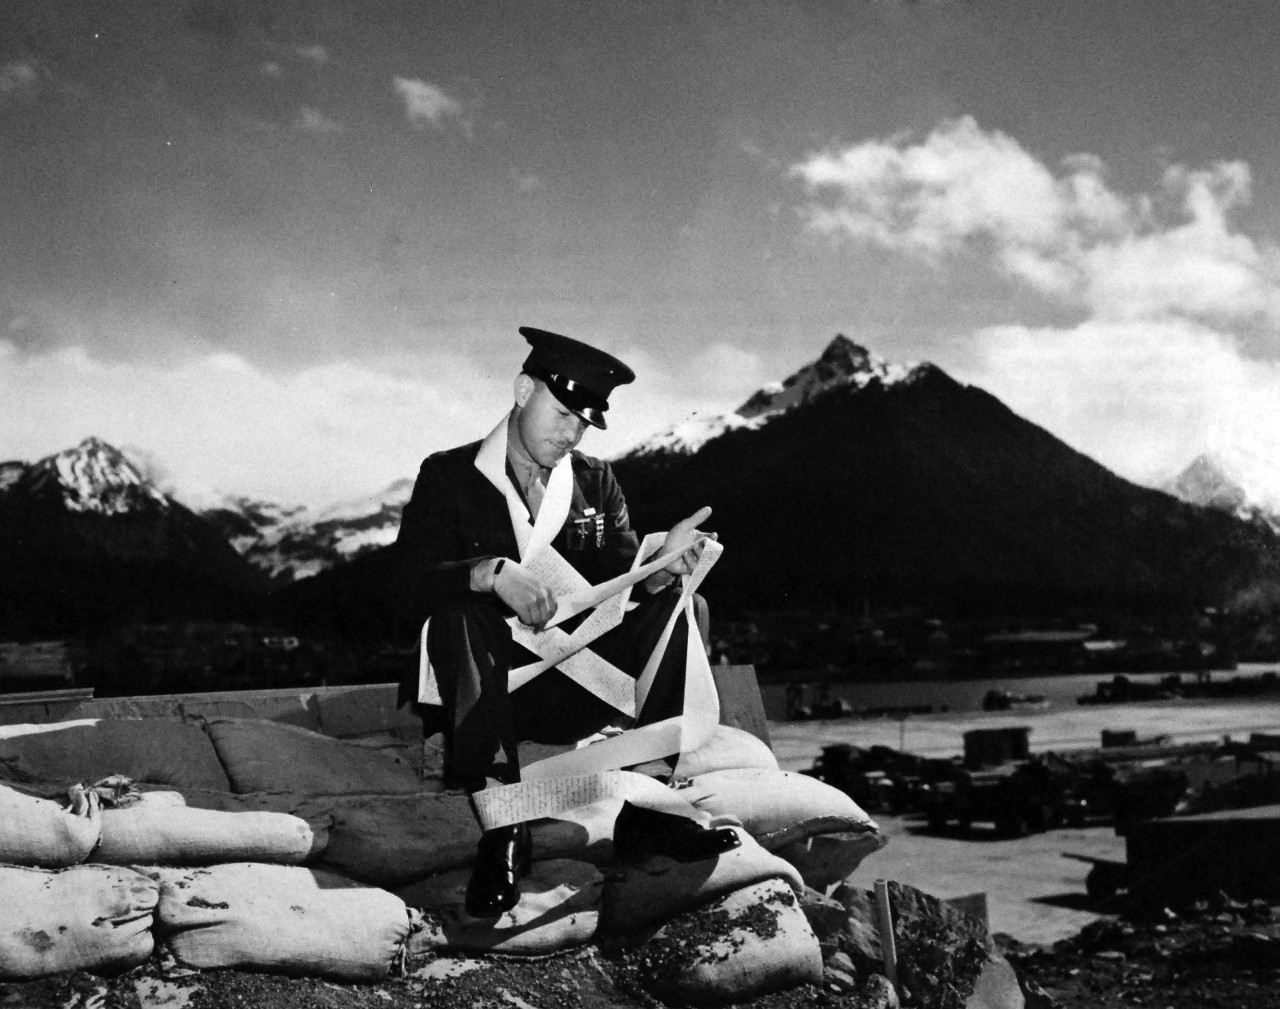 80-G-41502:   U.S. Naval Operation Base, Sitka, Alaska.     Sitting on a pile of sandbags at Sitka, Alaska, Private First Class Audrey Hopkins Hall, USMC, reads his letter from home.  It is 21 feet and 3.5 inches long.  It was started by his sister, circulated among his relatives and completed by his wife, Eleanor, a welder in a war plant, 18 March 1943.    Sitka was established in 1939.   Official U.S. Navy Photograph, now in the collections of the National Archives.  (2014/6/12). 